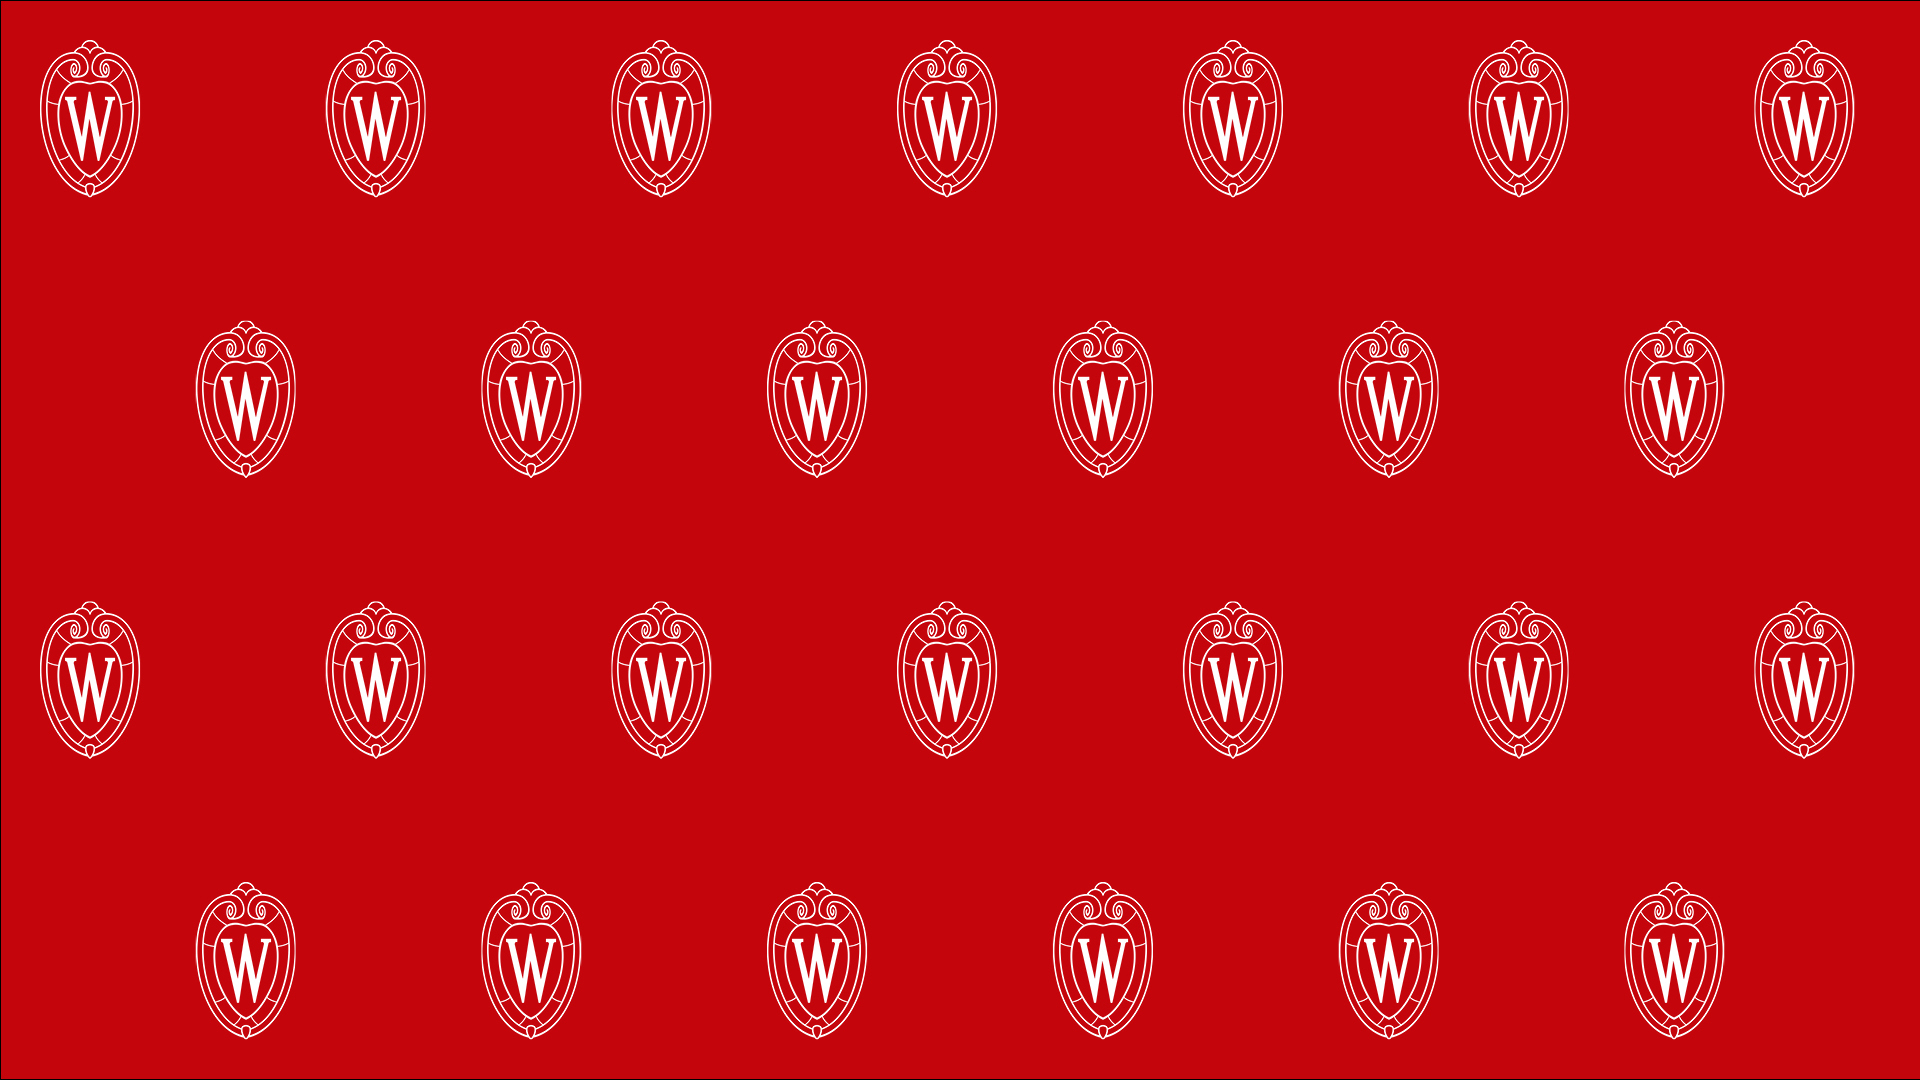 red meeting background tiled with white outline UW crest